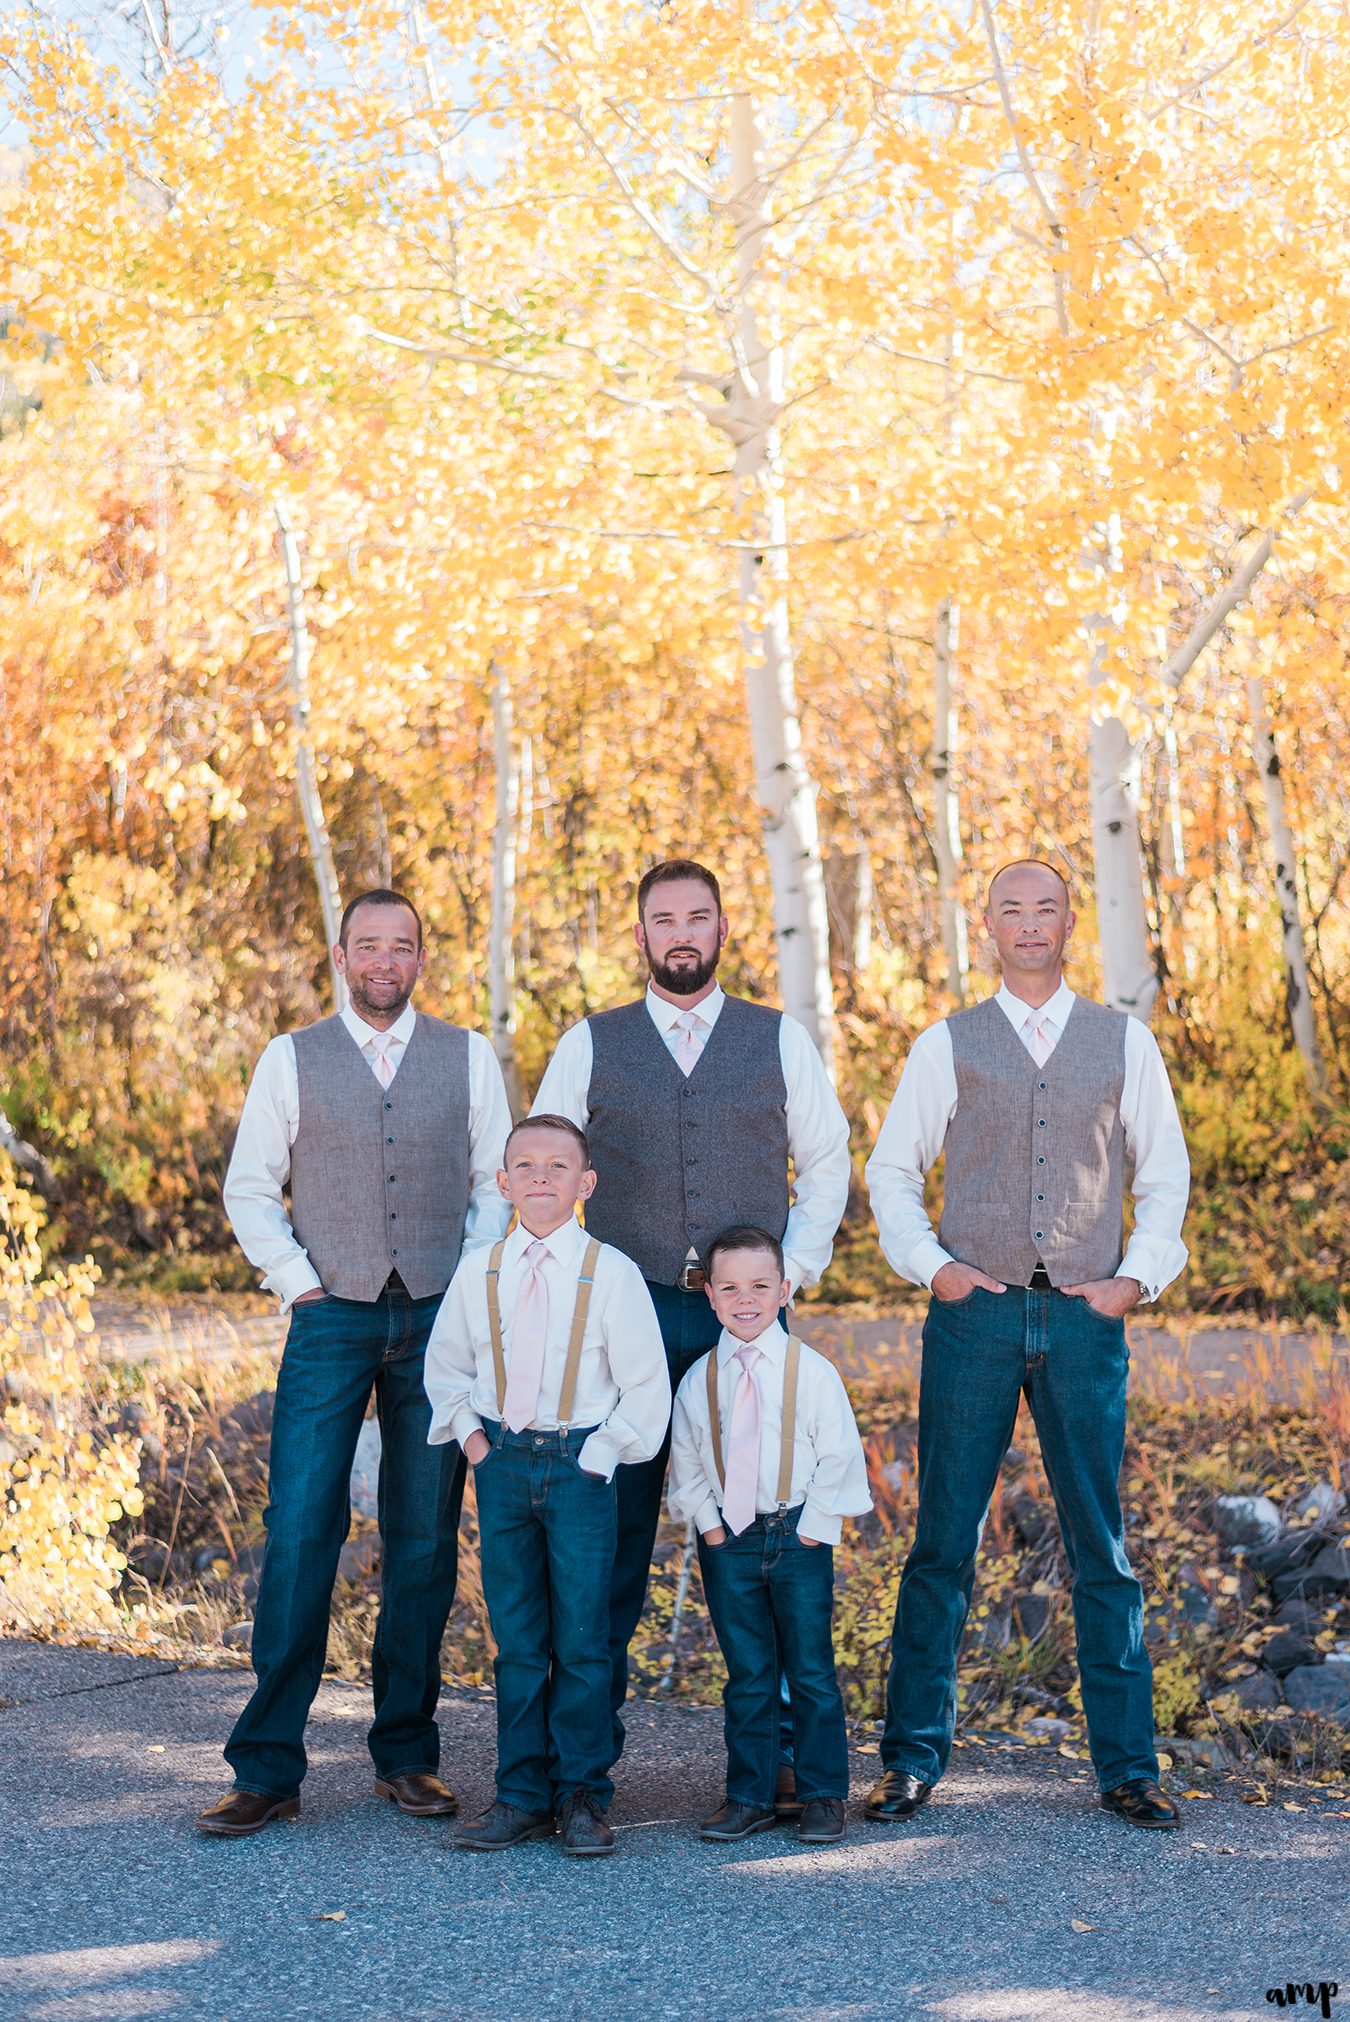 Groom and groomsmen portraits in the yellow aspen trees